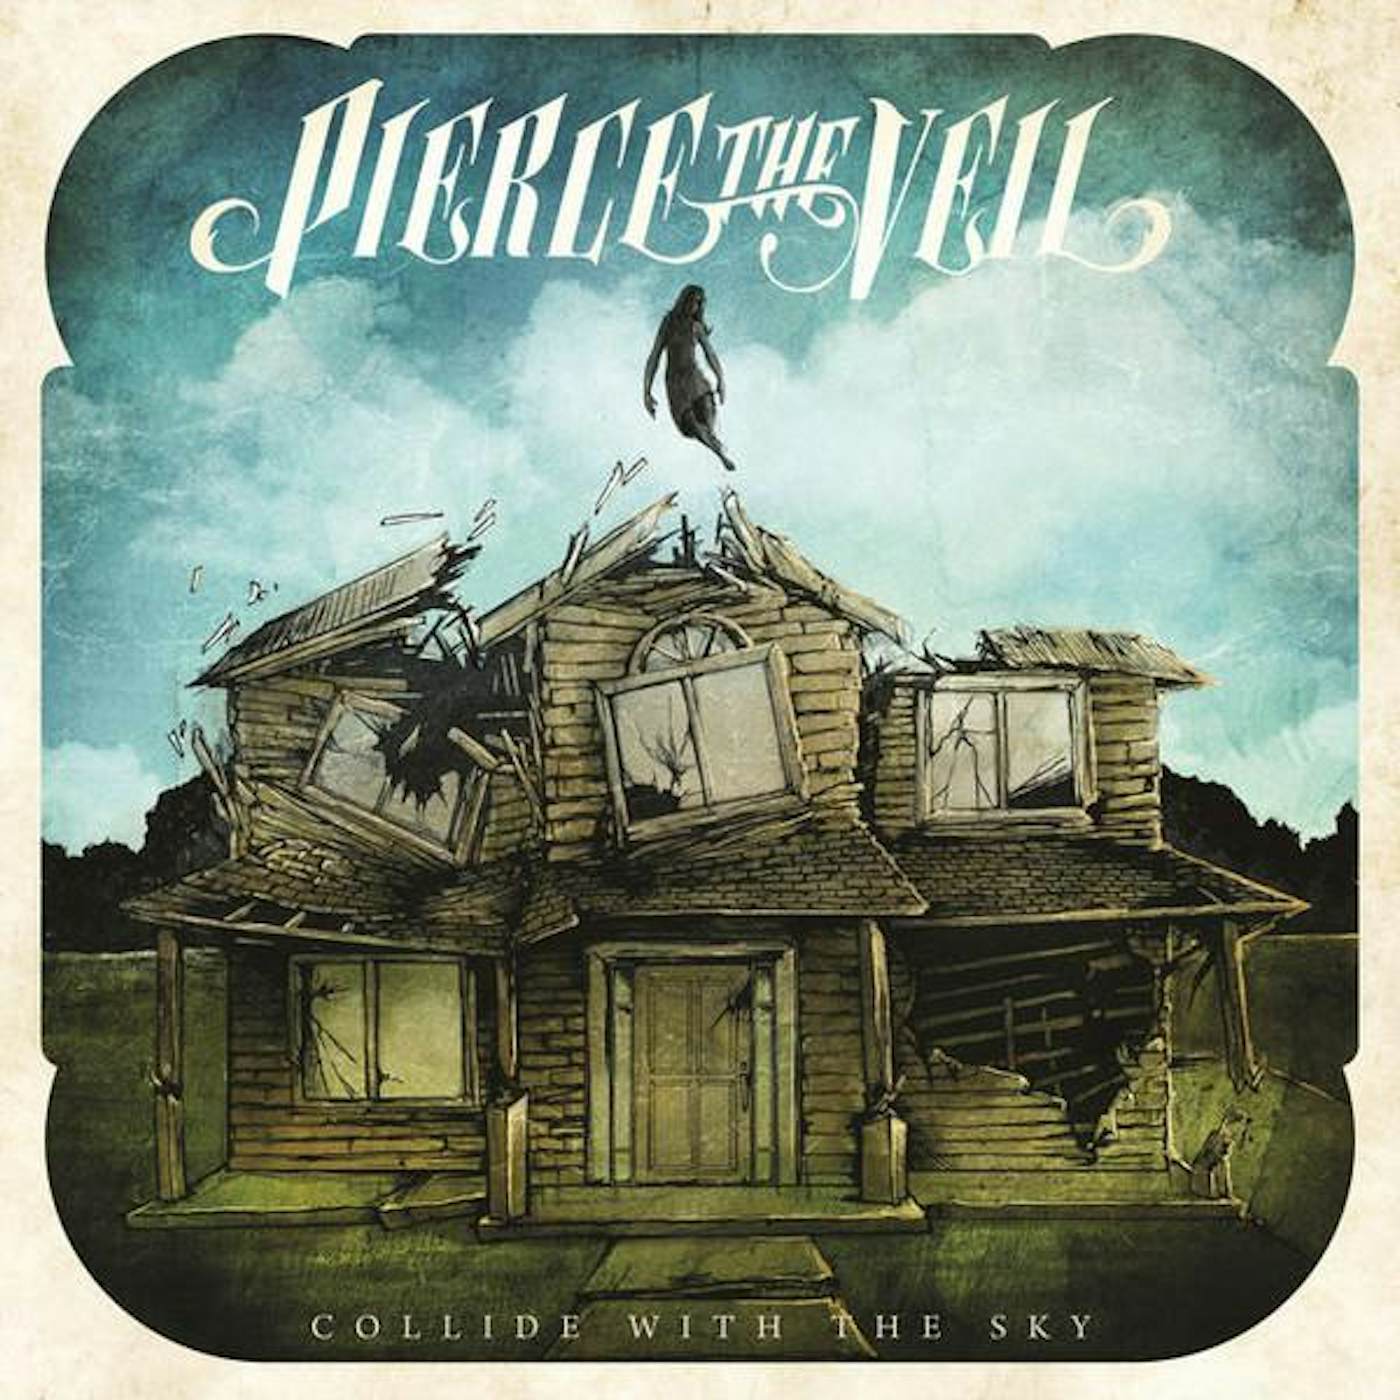 Pierce The Veil Collide With The Sky (Colored vinyl) Vinyl Record